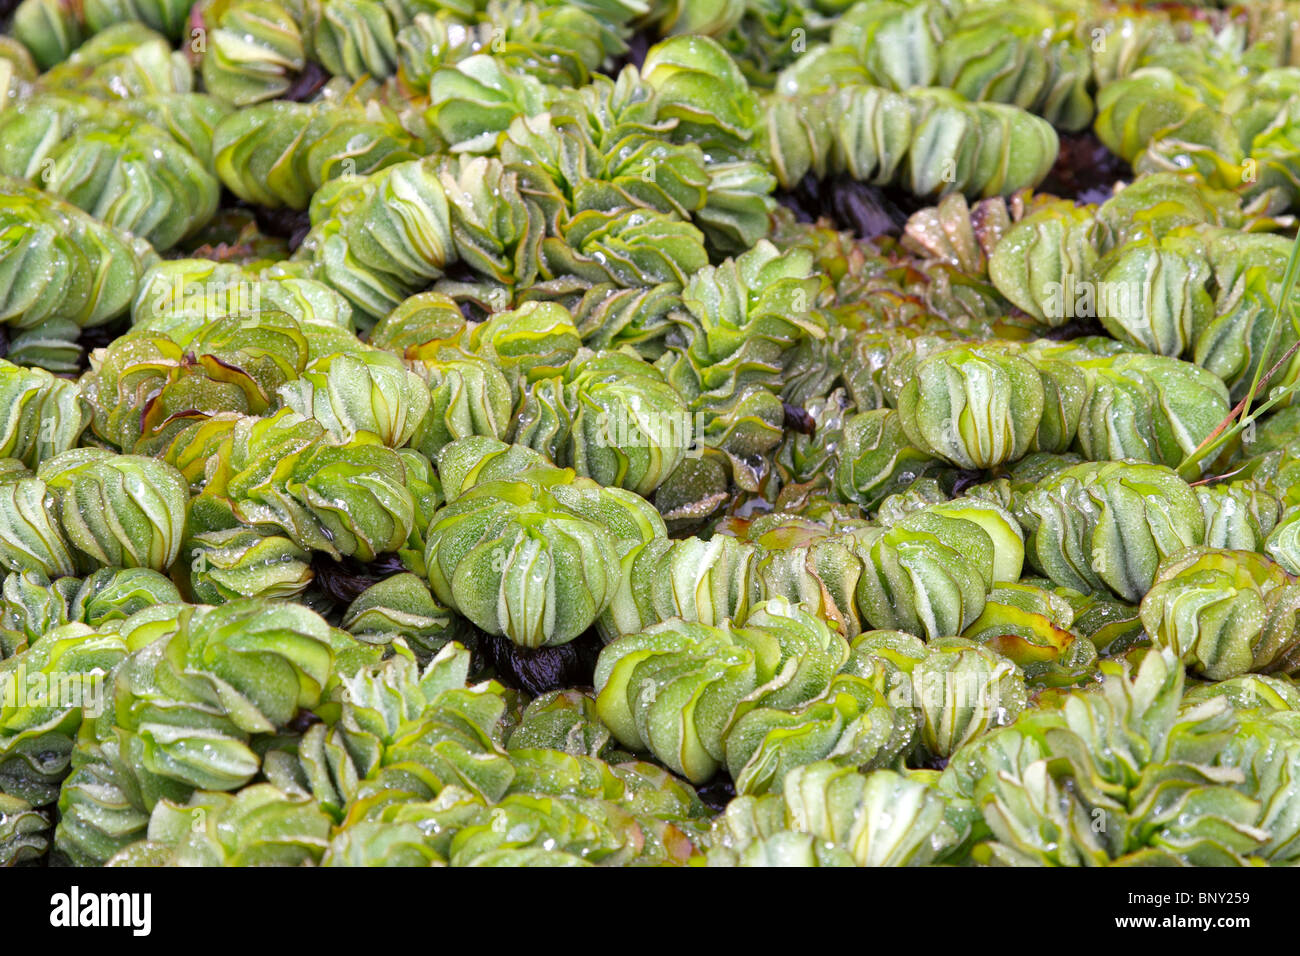 Giant Salvinia, Salvinia molesta, one of the most invasive aquatic weeds in the world. Stock Photo